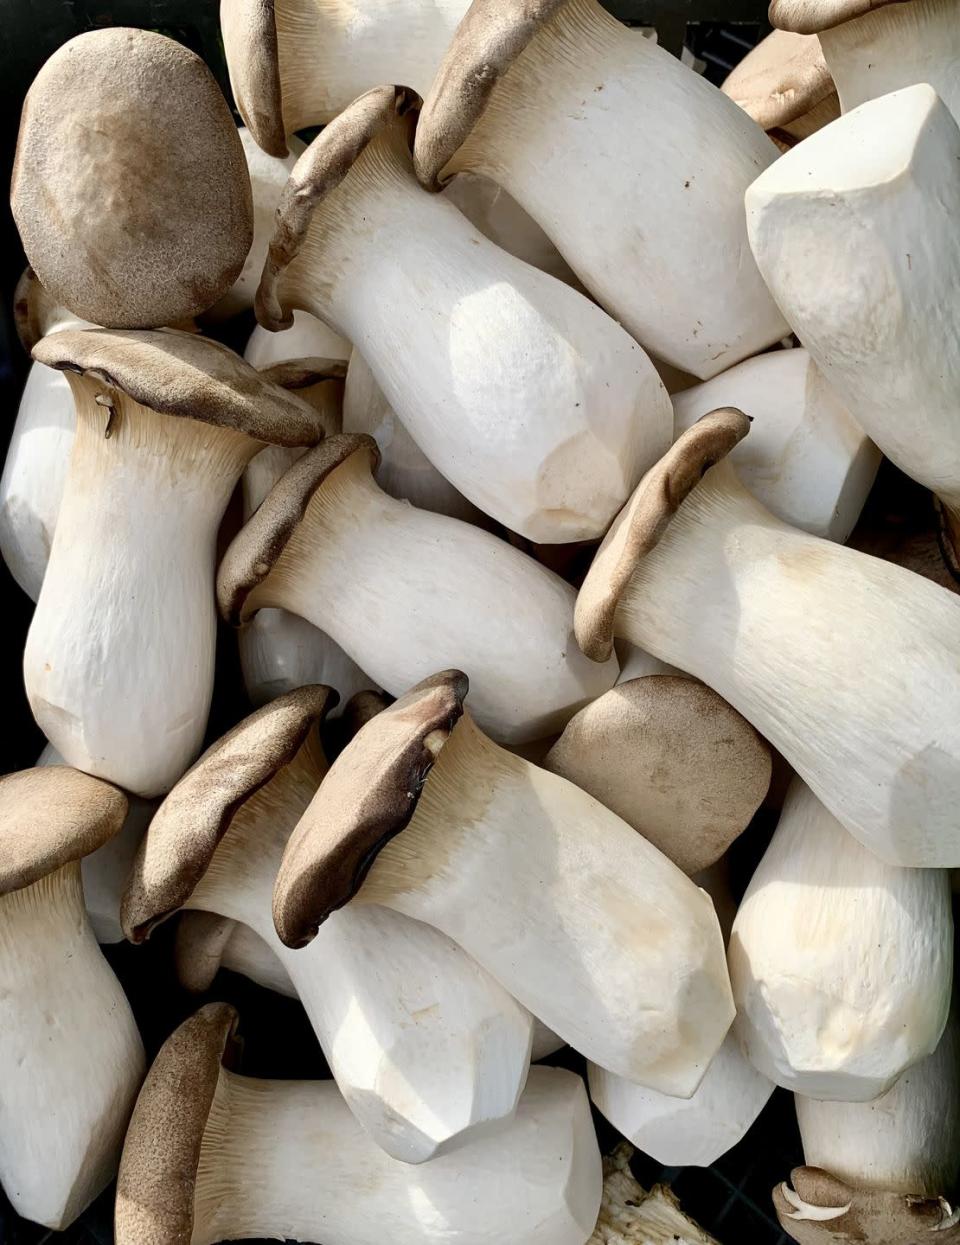 <p>Trumpet mushrooms have a thick stalk and thin caps. "Also known as king oyster mushrooms, these large mushrooms have a great, scallop-like texture," Linford said. "Excellent fried or added to sauces or stews." Try <a href="https://www.delish.com/cooking/recipe-ideas/a15325/seared-scallops-recipe-fw0311/" rel="nofollow noopener" target="_blank" data-ylk="slk:replacing the scallops in this recipe" class="link ">replacing the scallops in this recipe</a> with a one-inch slice of the stem.</p>